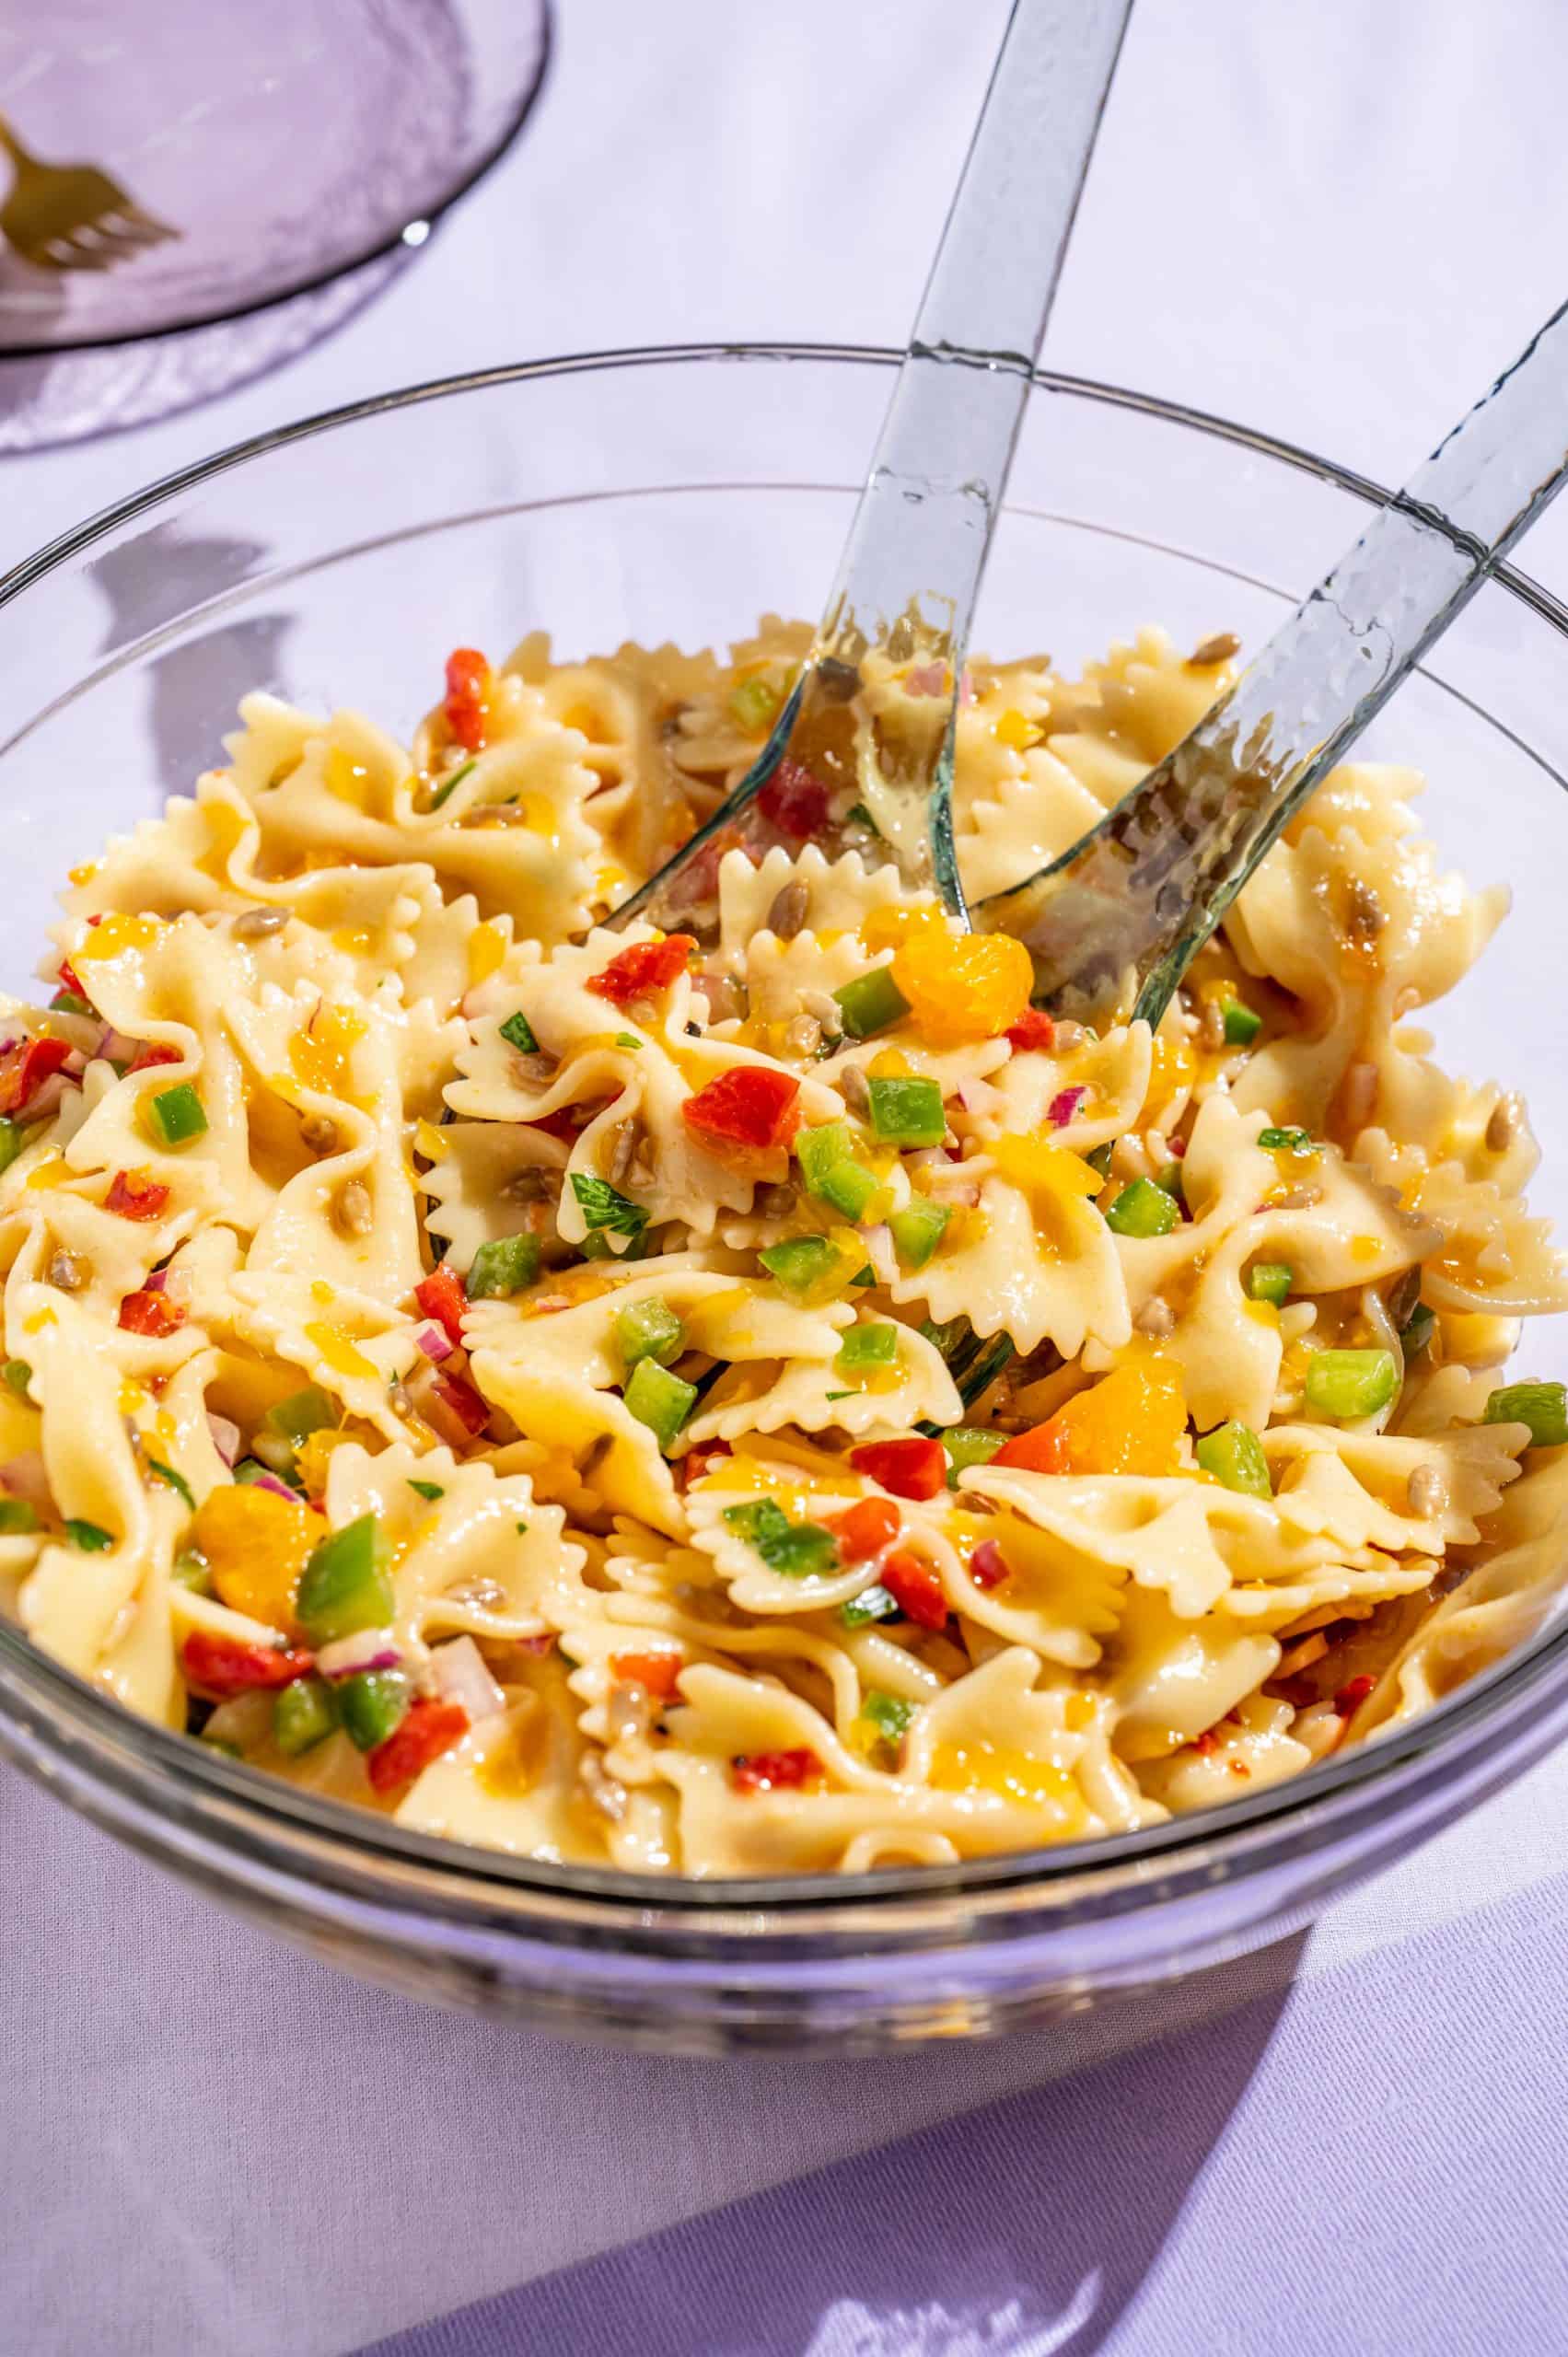 Honey pasta salad in a large glass bowl with serving tongs